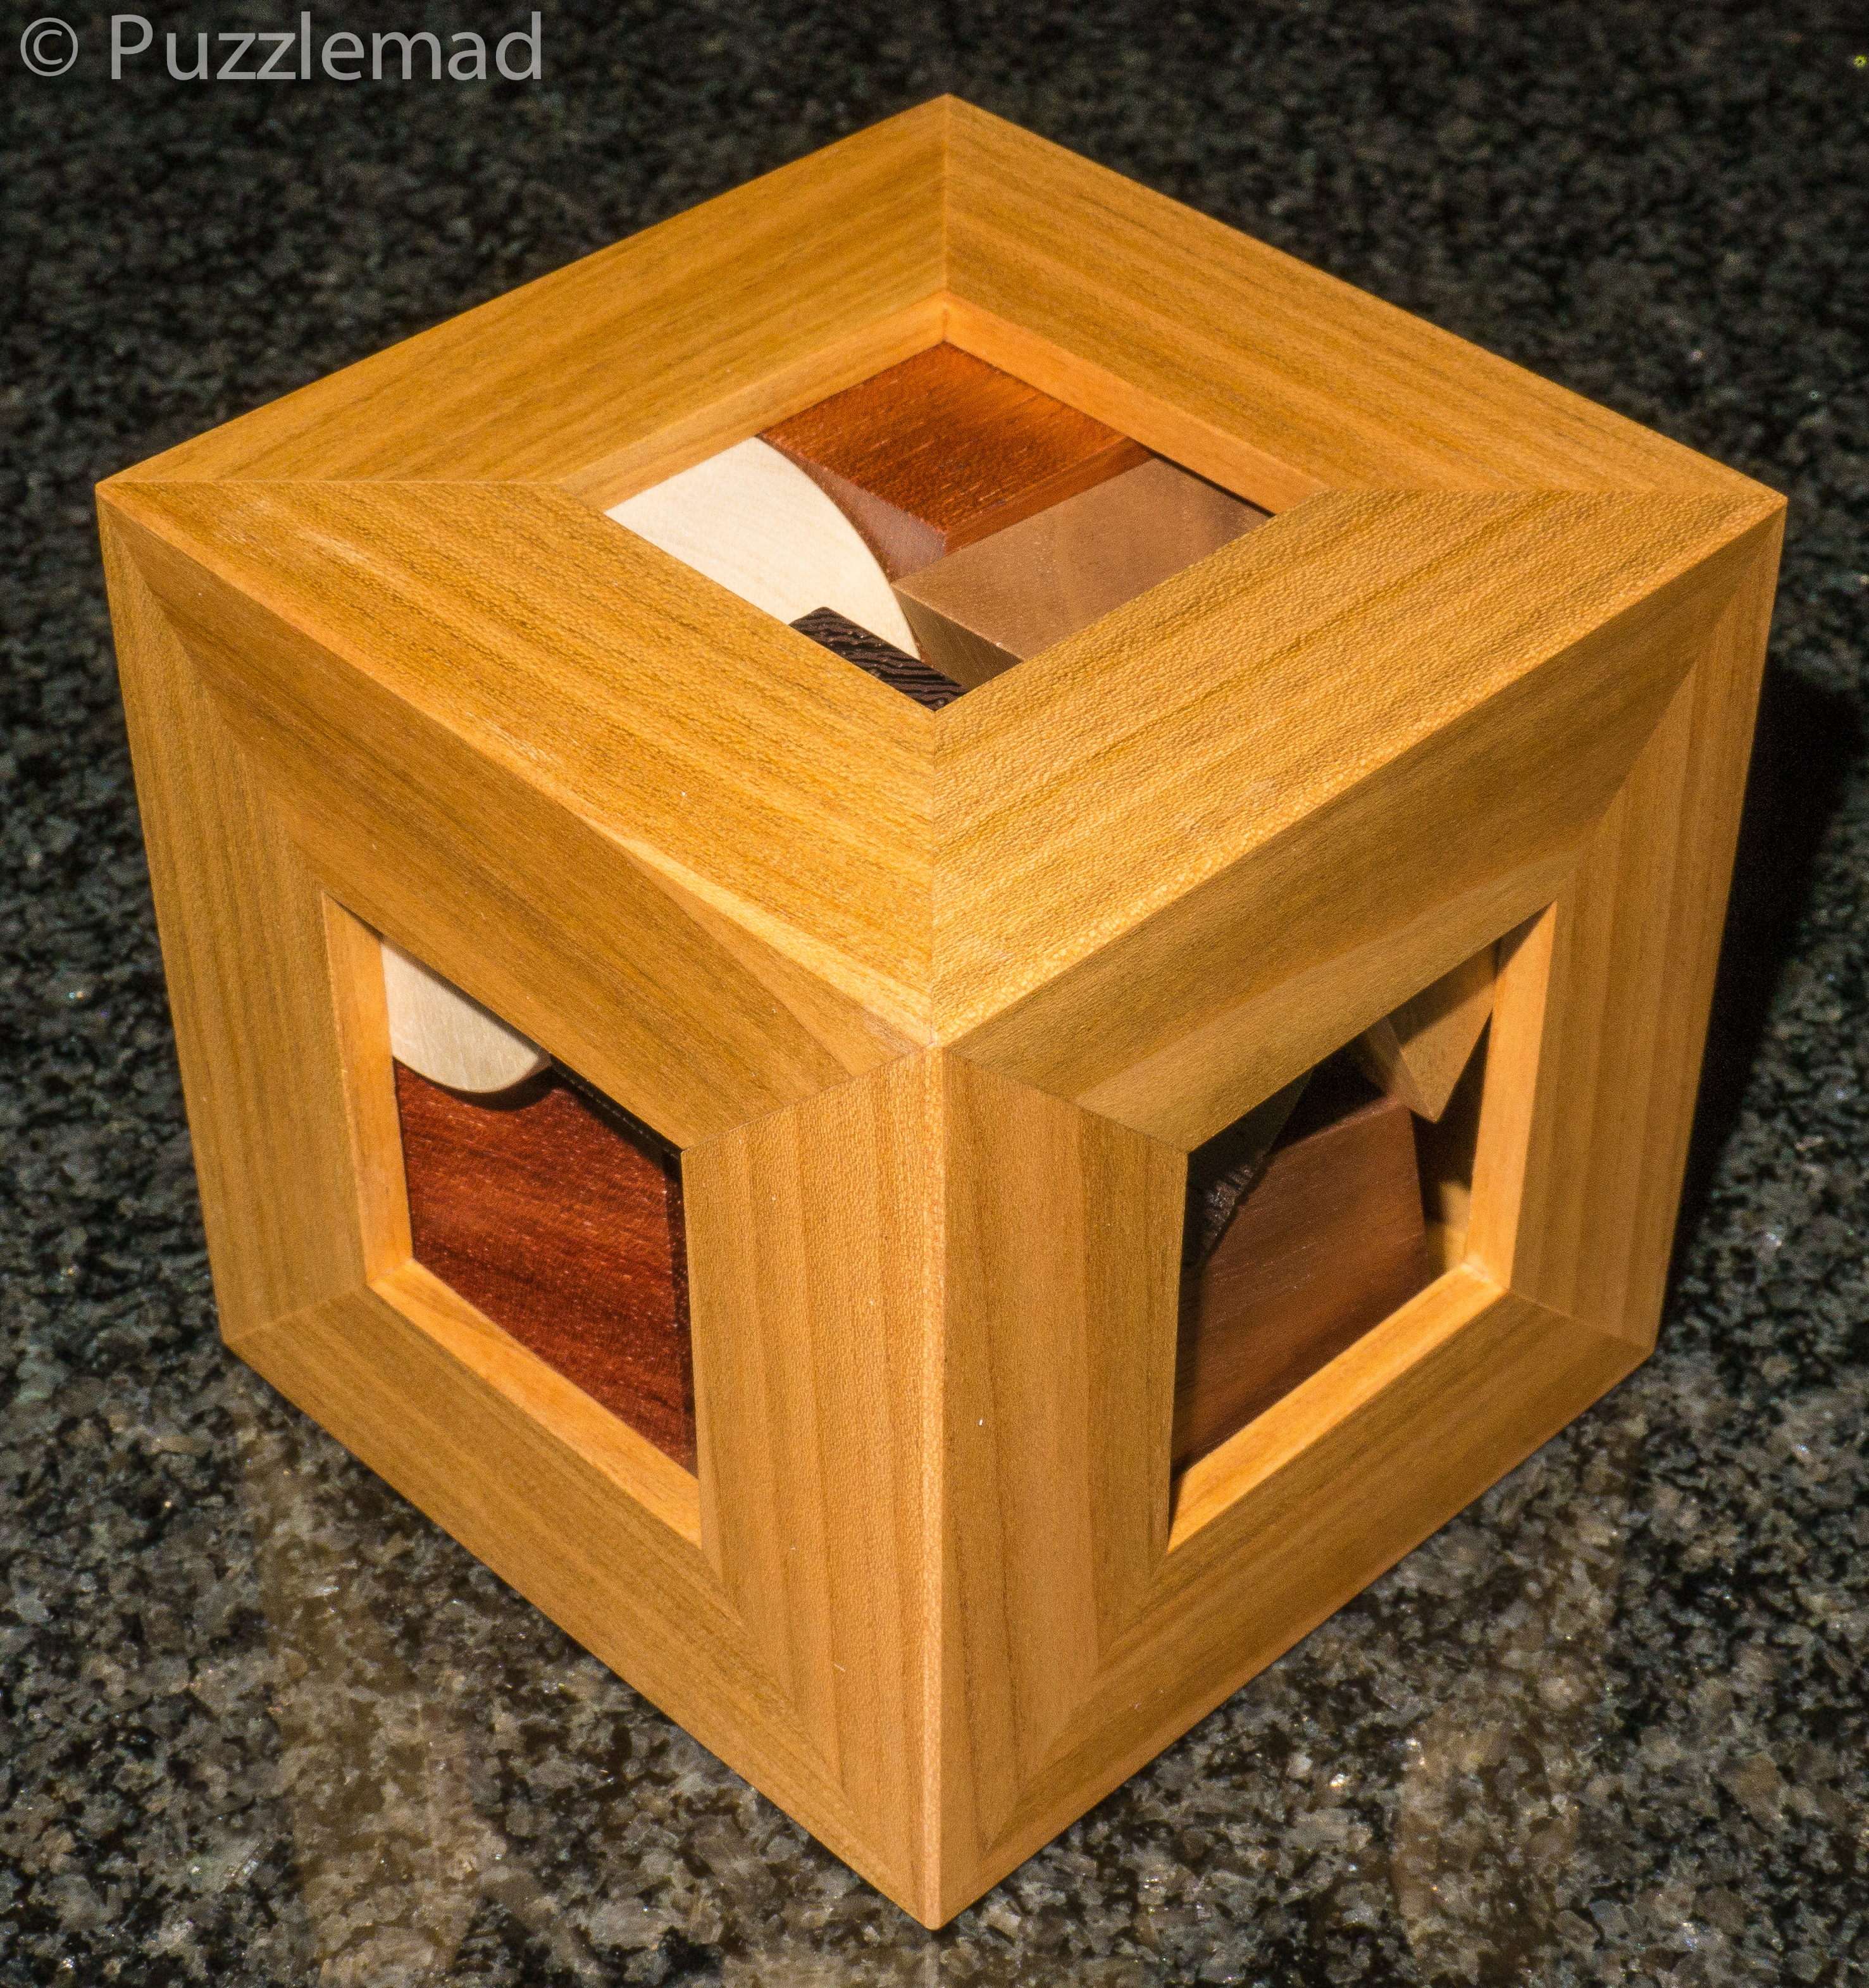 Three Little Puzzle Cubes Are We: MW Puzzles – Puzzle Ramblings